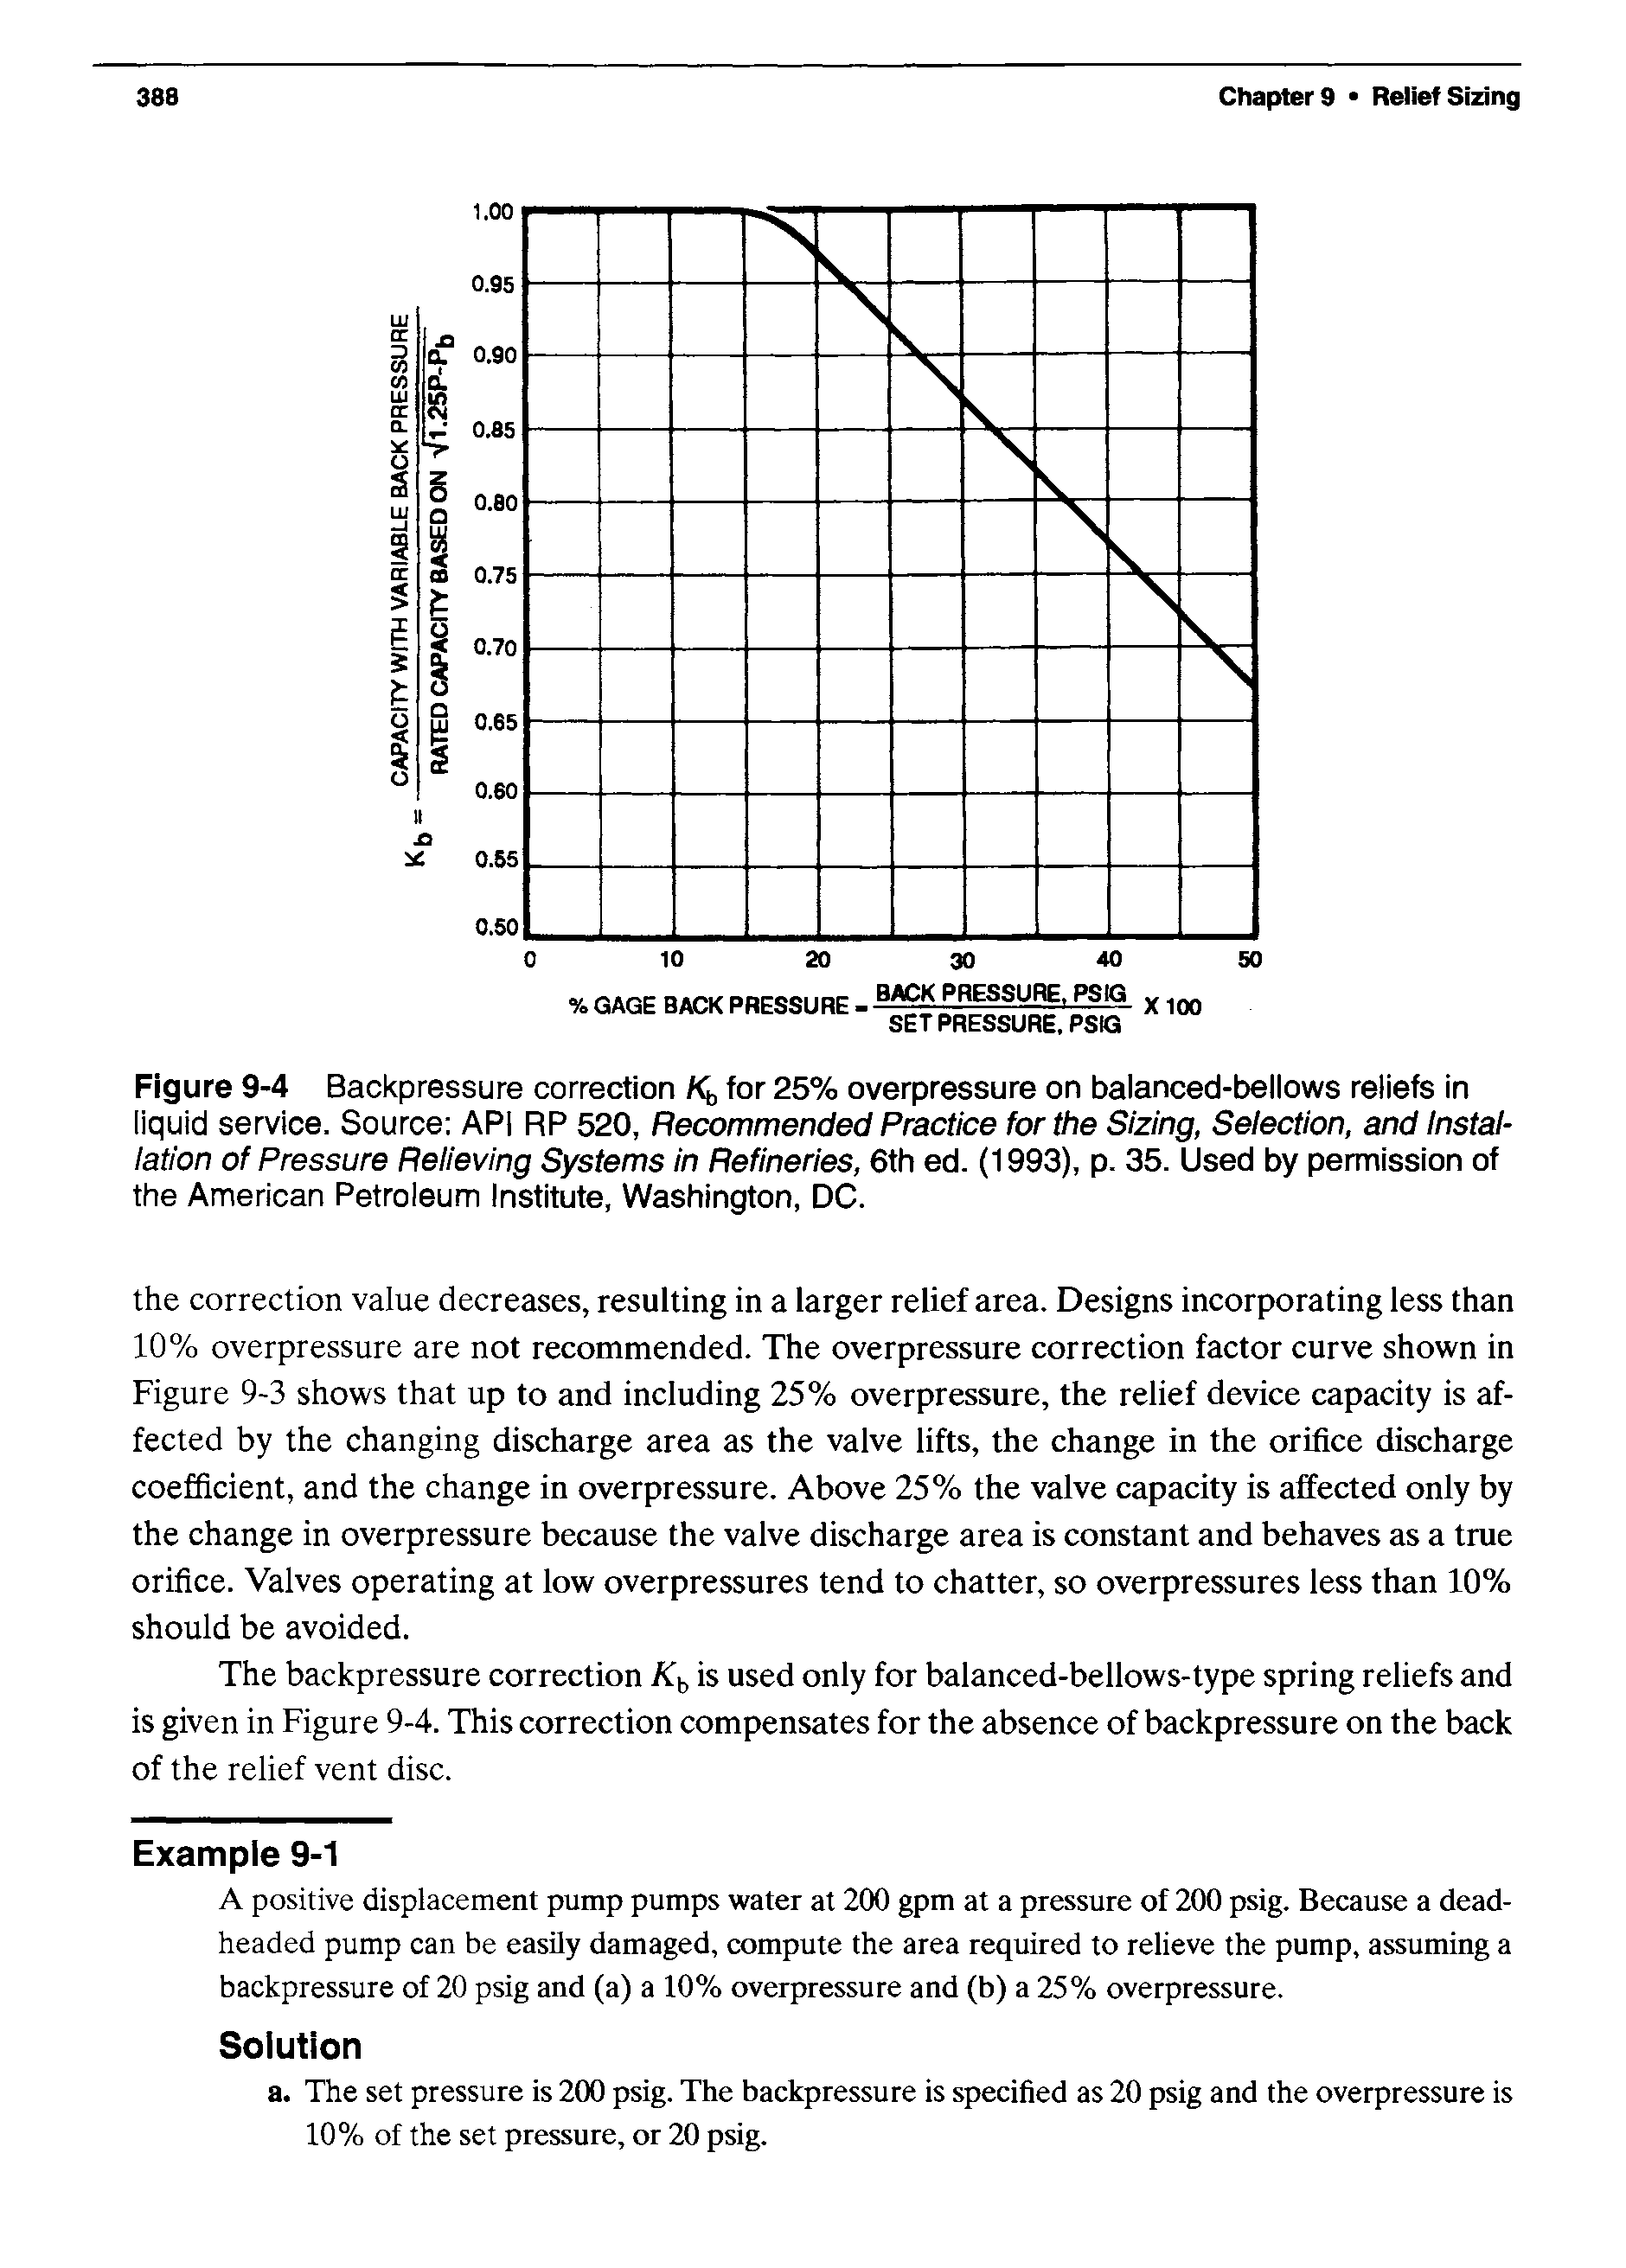 Figure 9-4 Backpressure correction Kb for 25% overpressure on balanced-bellows reliefs in liquid service. Source API RP 520, Recommended Practice for the Sizing, Selection, and Installation of Pressure Relieving Systems in Refineries, 6th ed. (1993), p. 35. Used by permission of the American Petroleum Institute, Washington, DC.